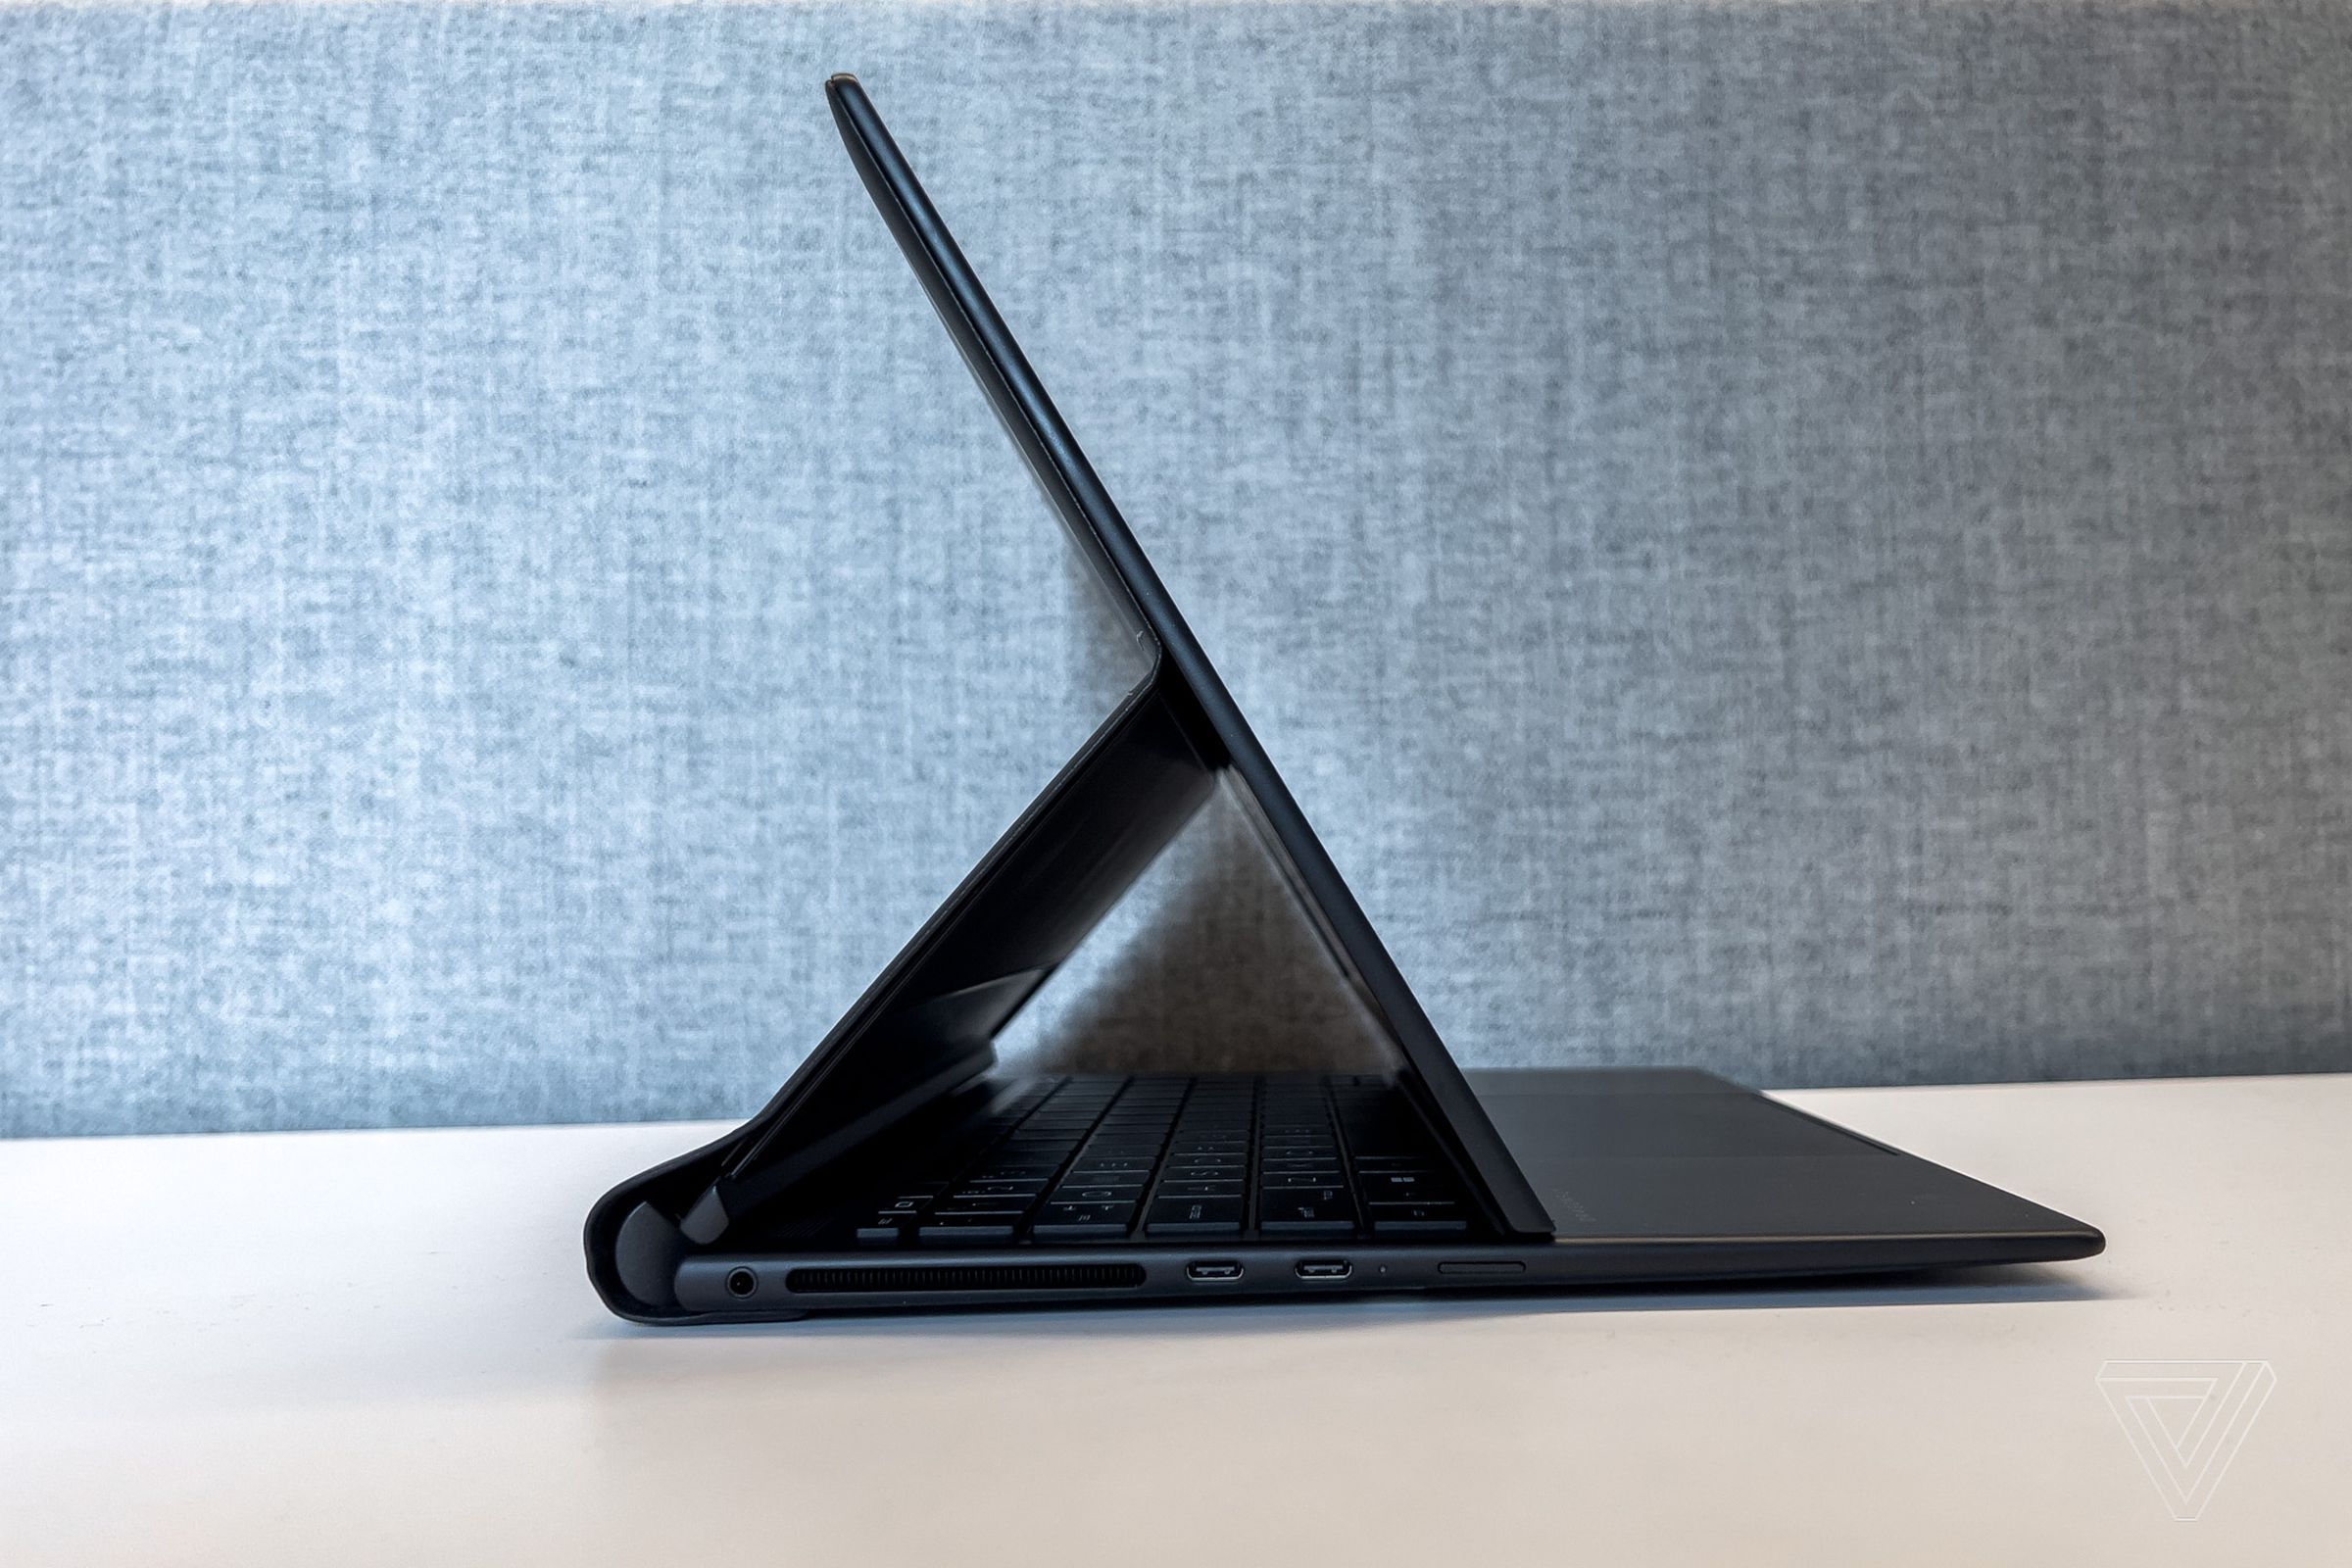 The HP Dragonfly Folio G3 in folio mode on a desk seen from the right side.